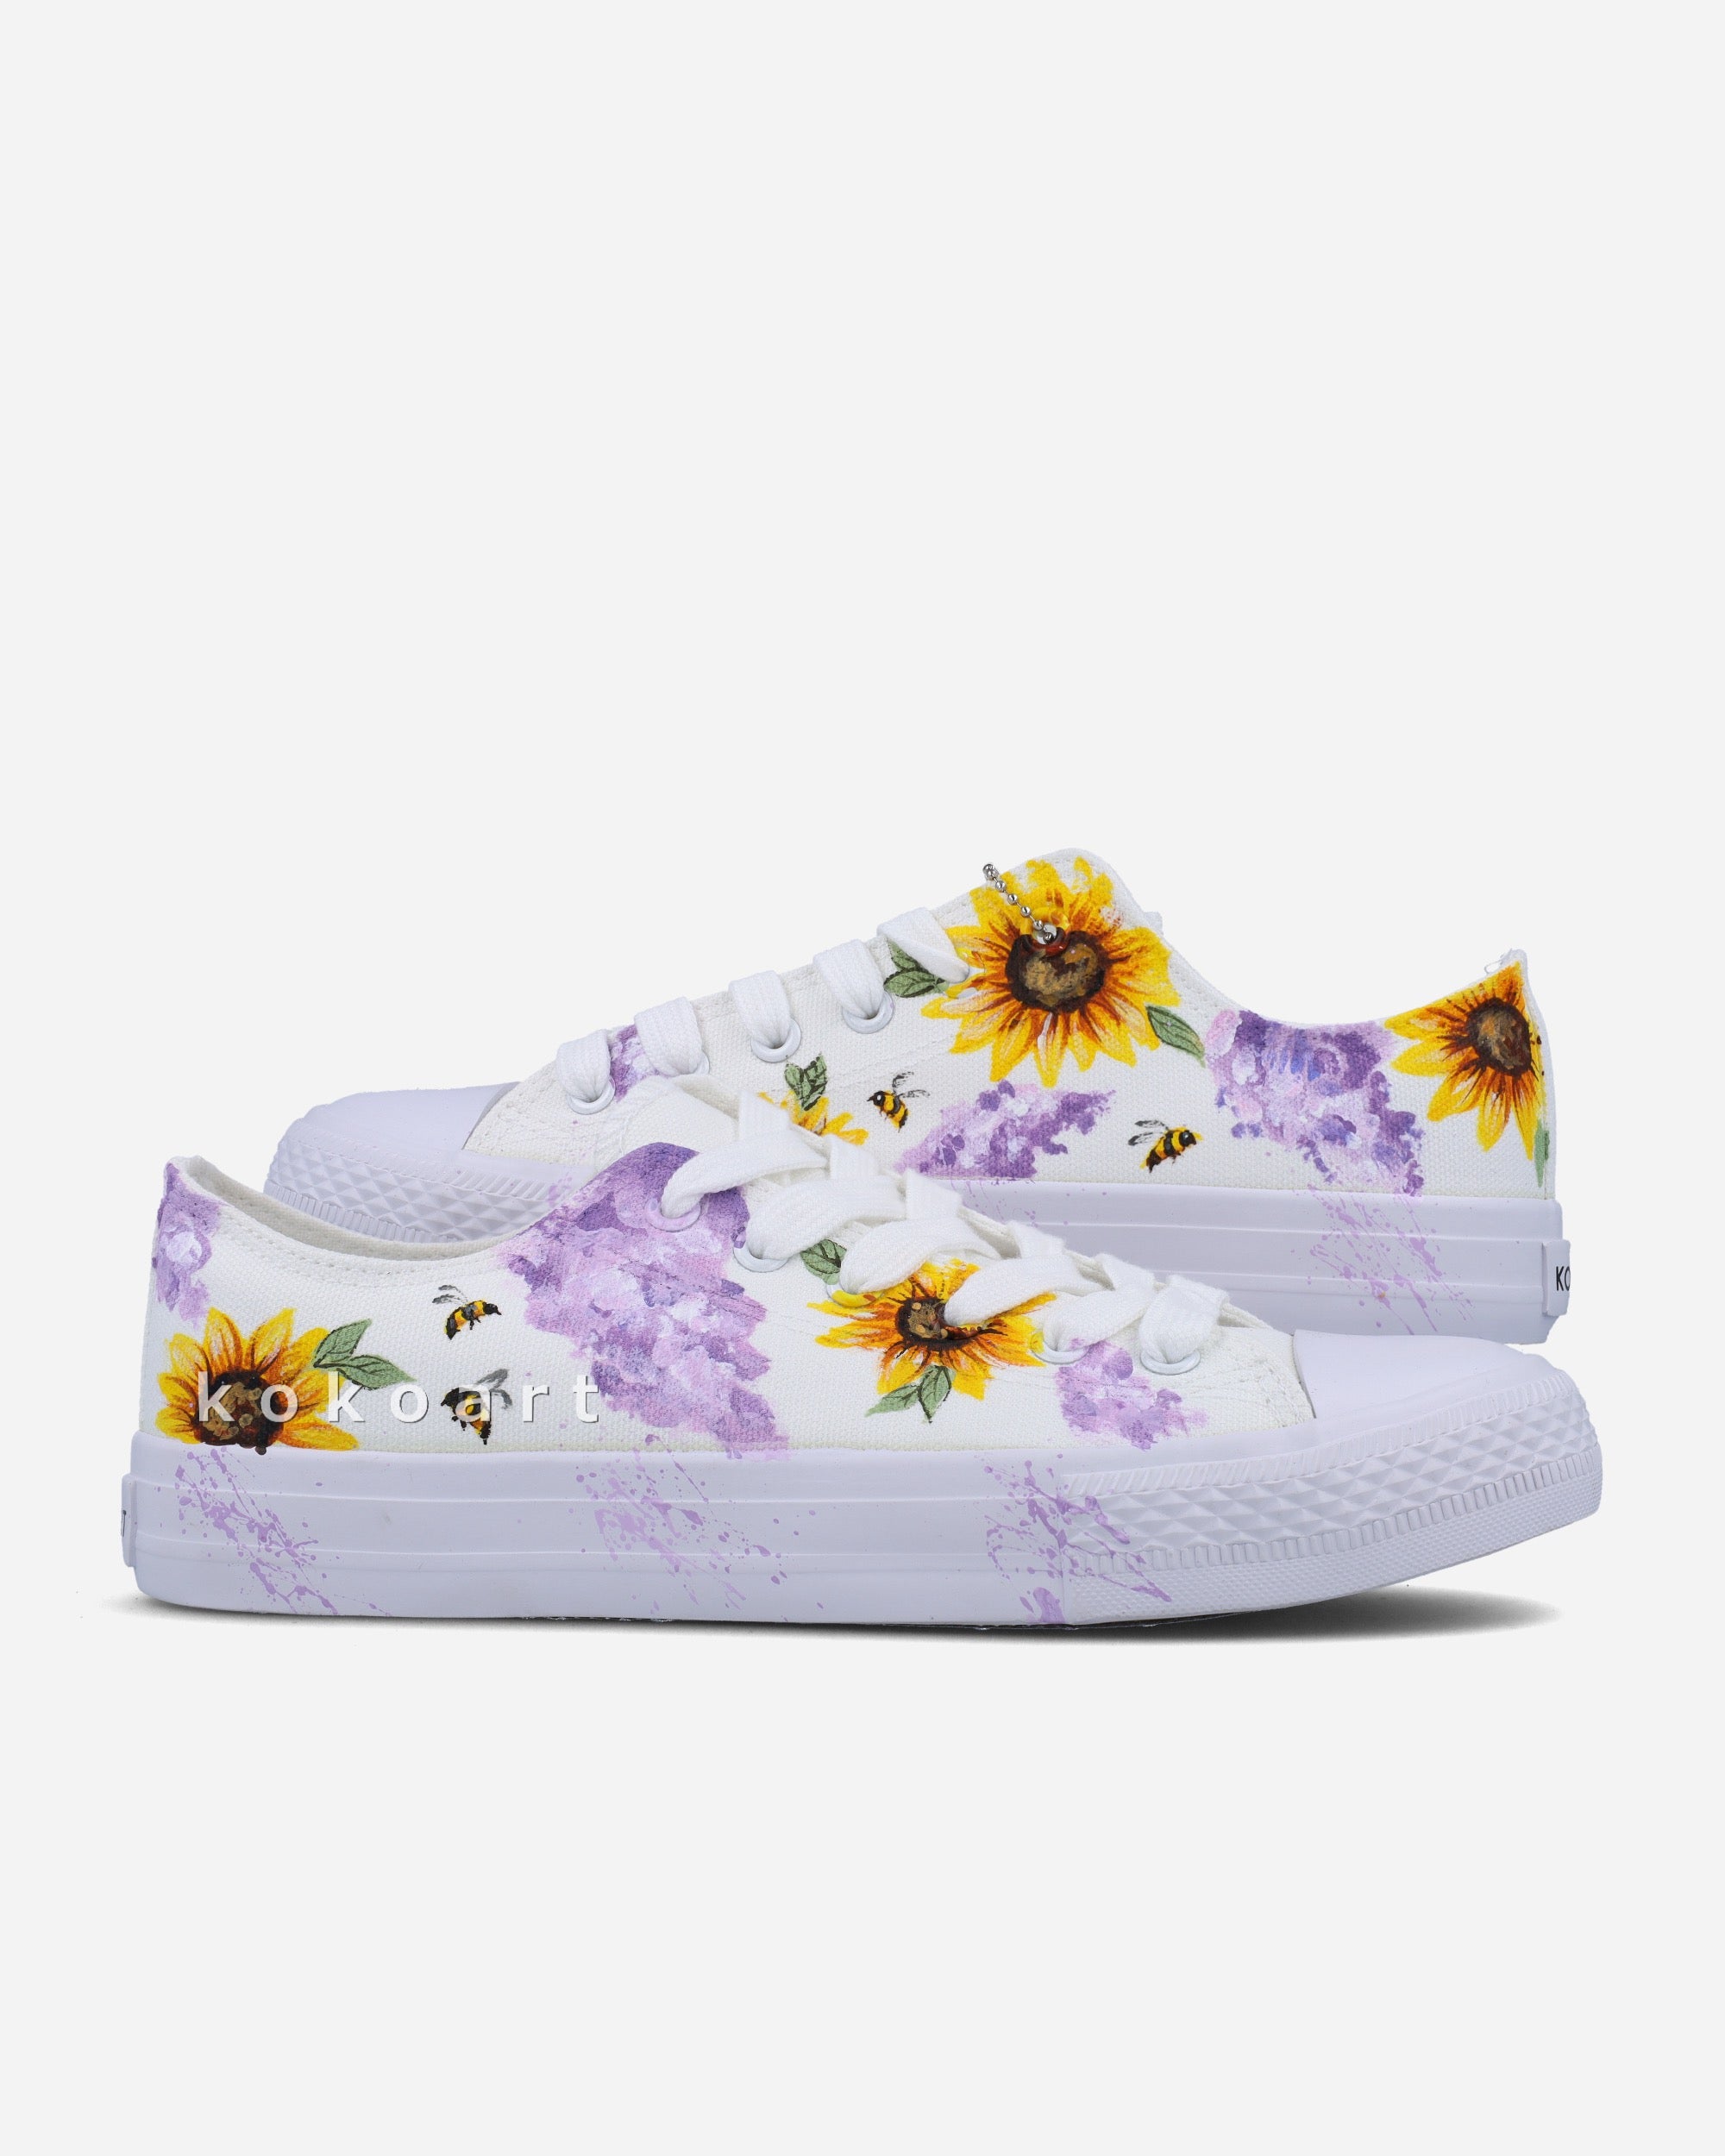 Flowers and Bees Hand Painted Shoes